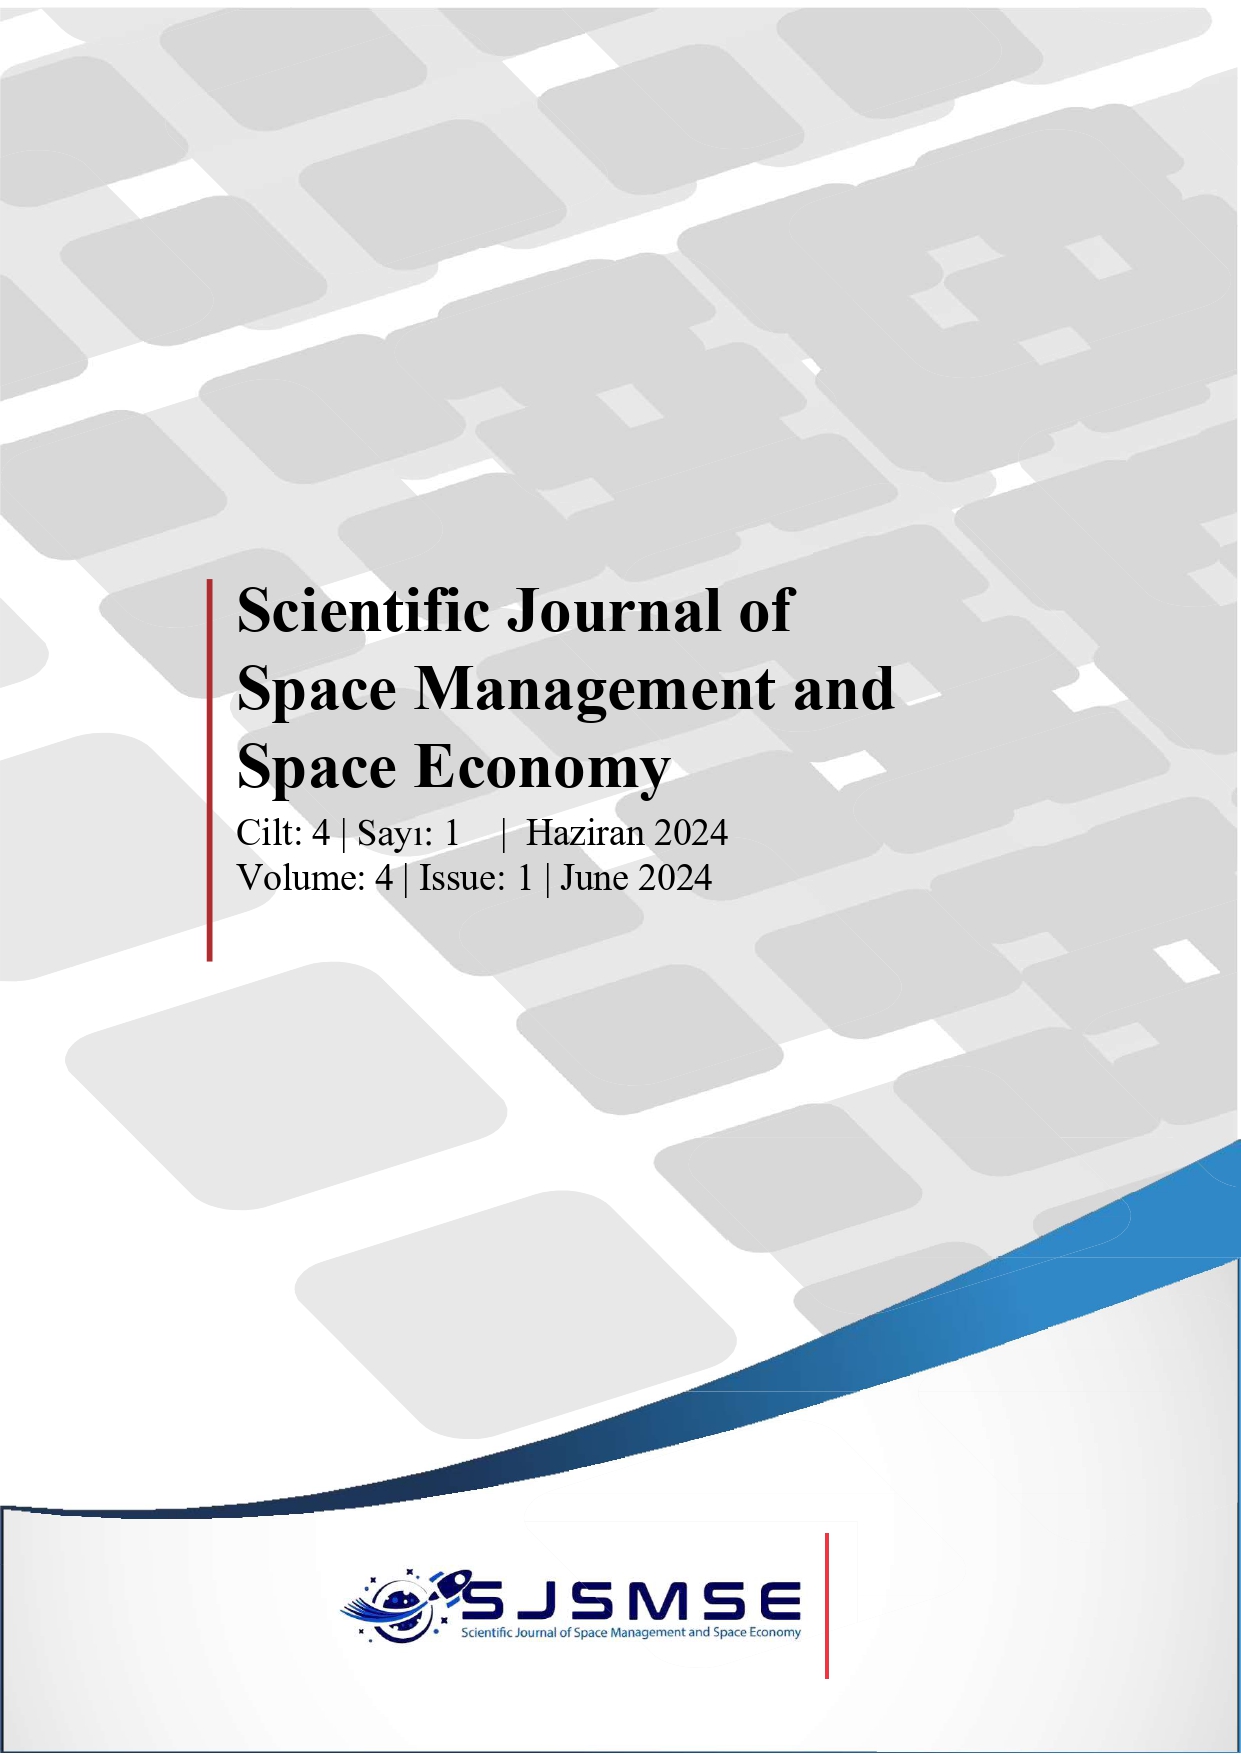 					Cilt 4 Sayı 1 (2024): SCIENTIFIC JOURNAL OF SPACE MANAGEMENT AND SPACE ECONOMY Gör
				